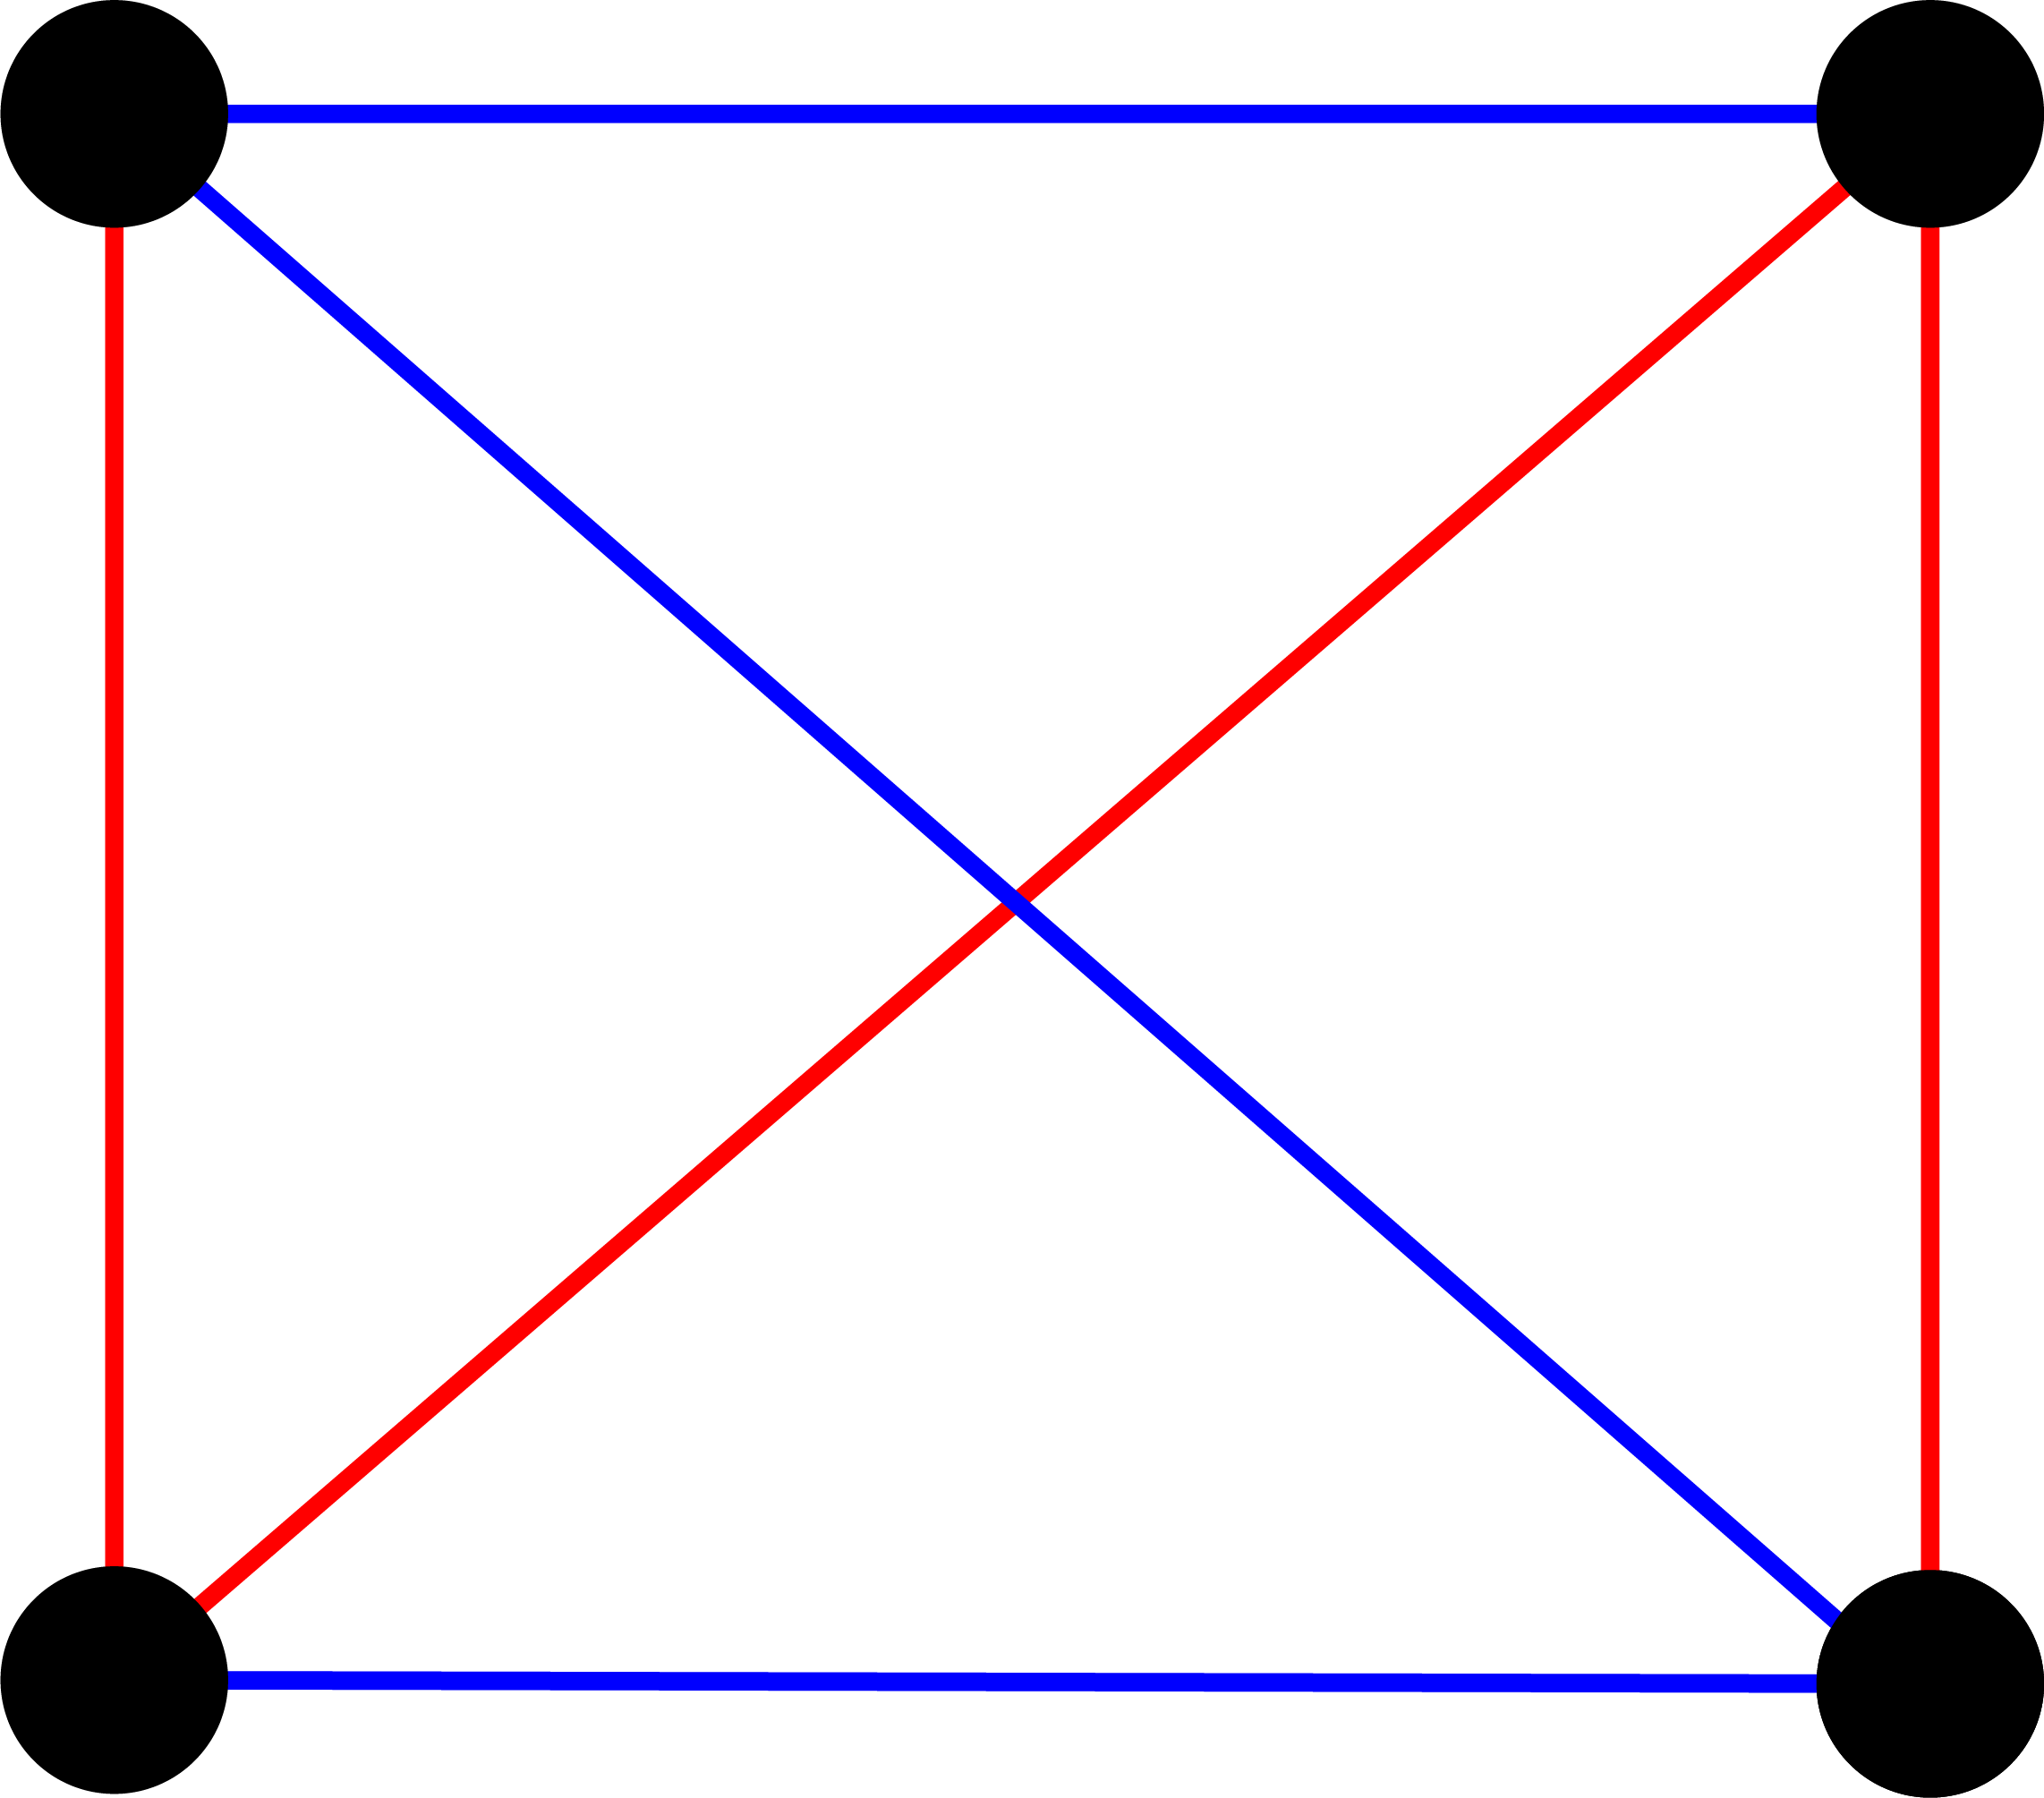 Square with two bisecting lines forming an X.